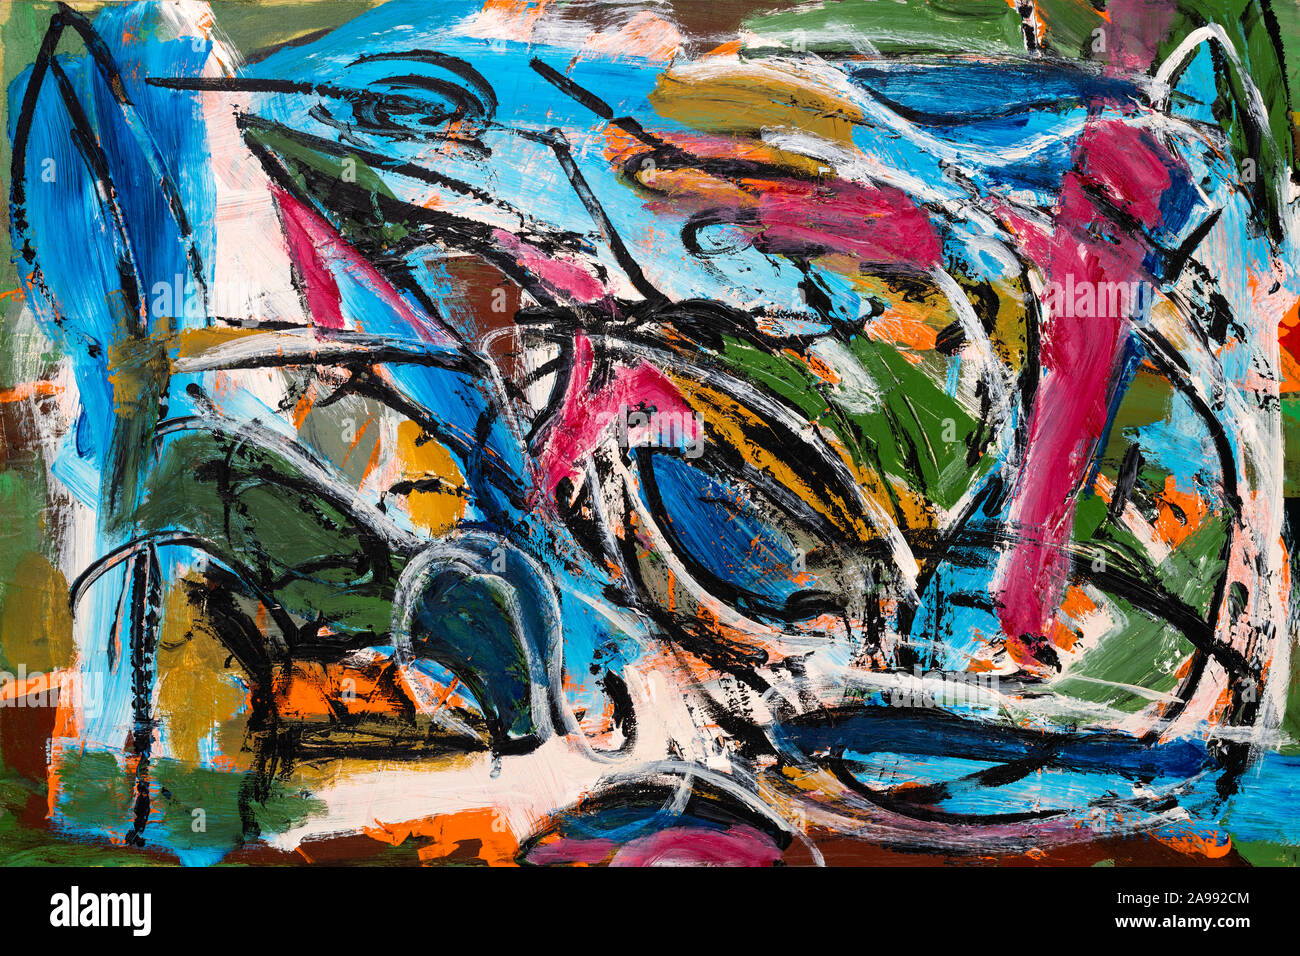 Abstract painting with vibrant colors, strong shapes and brushstrokes textures. Stock Photo